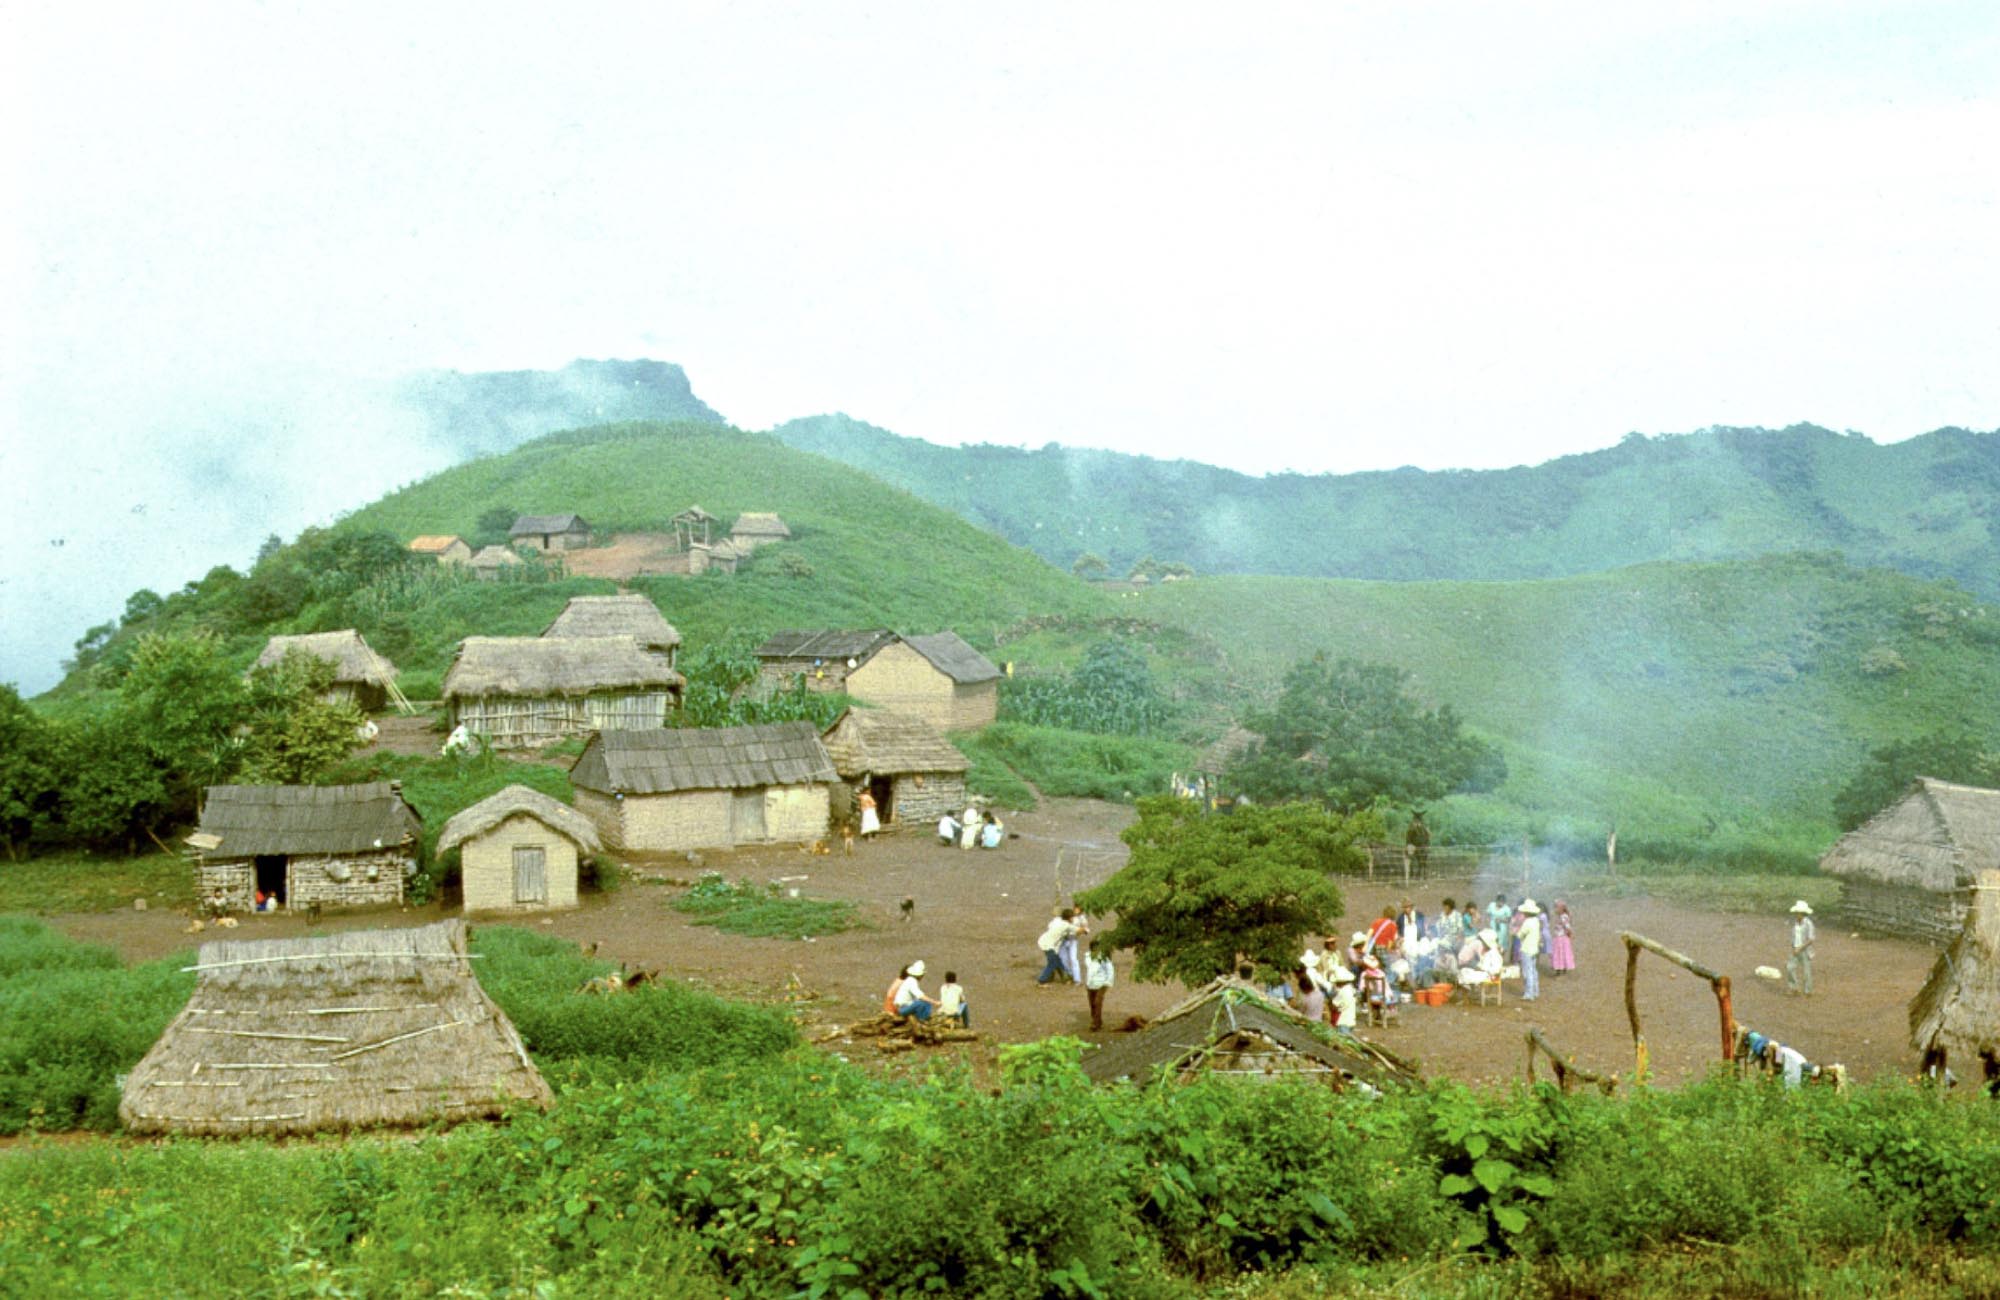 A Huchol village in the Sierra Madre Mountains of Mexico